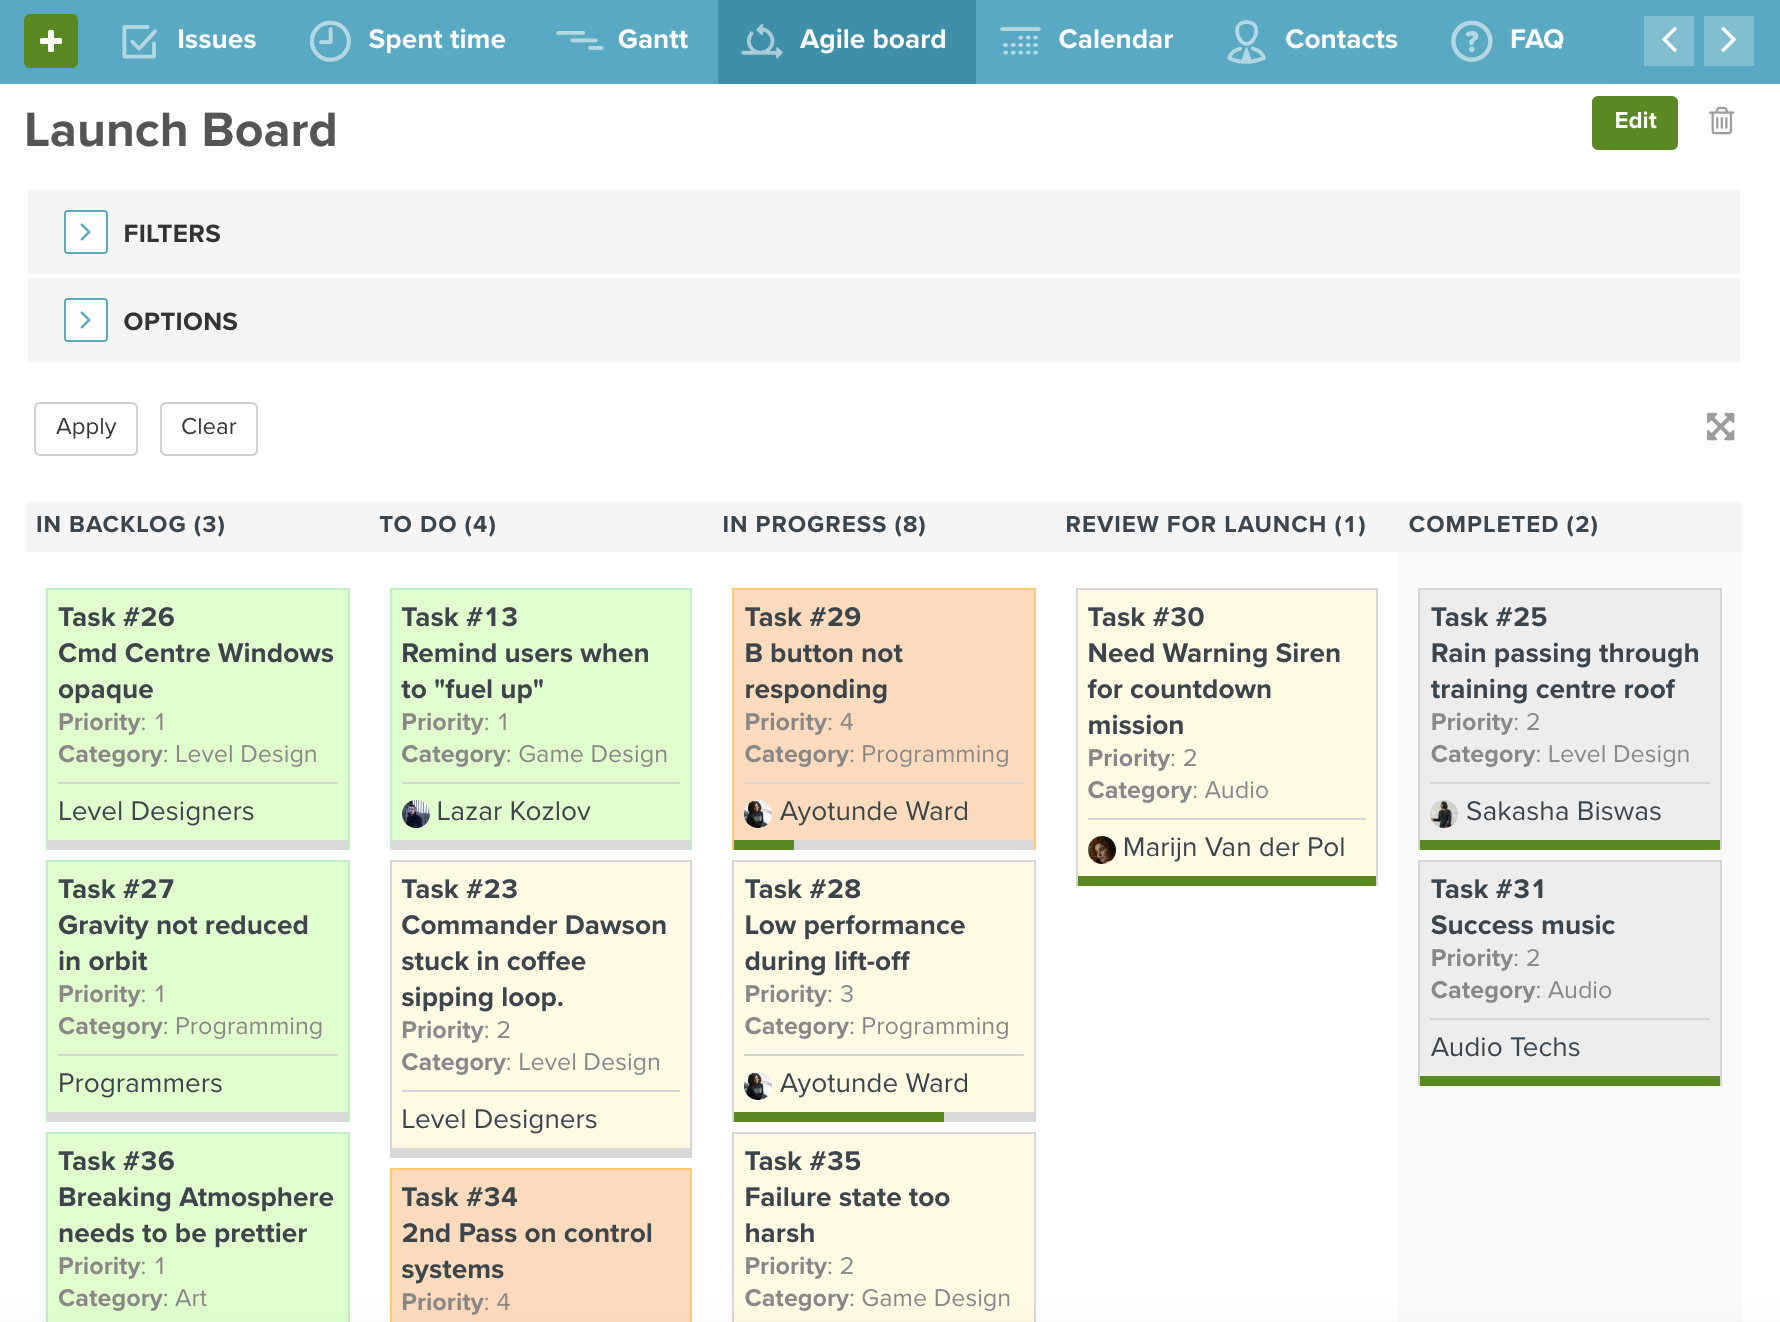 Agile board showing who is doing what work